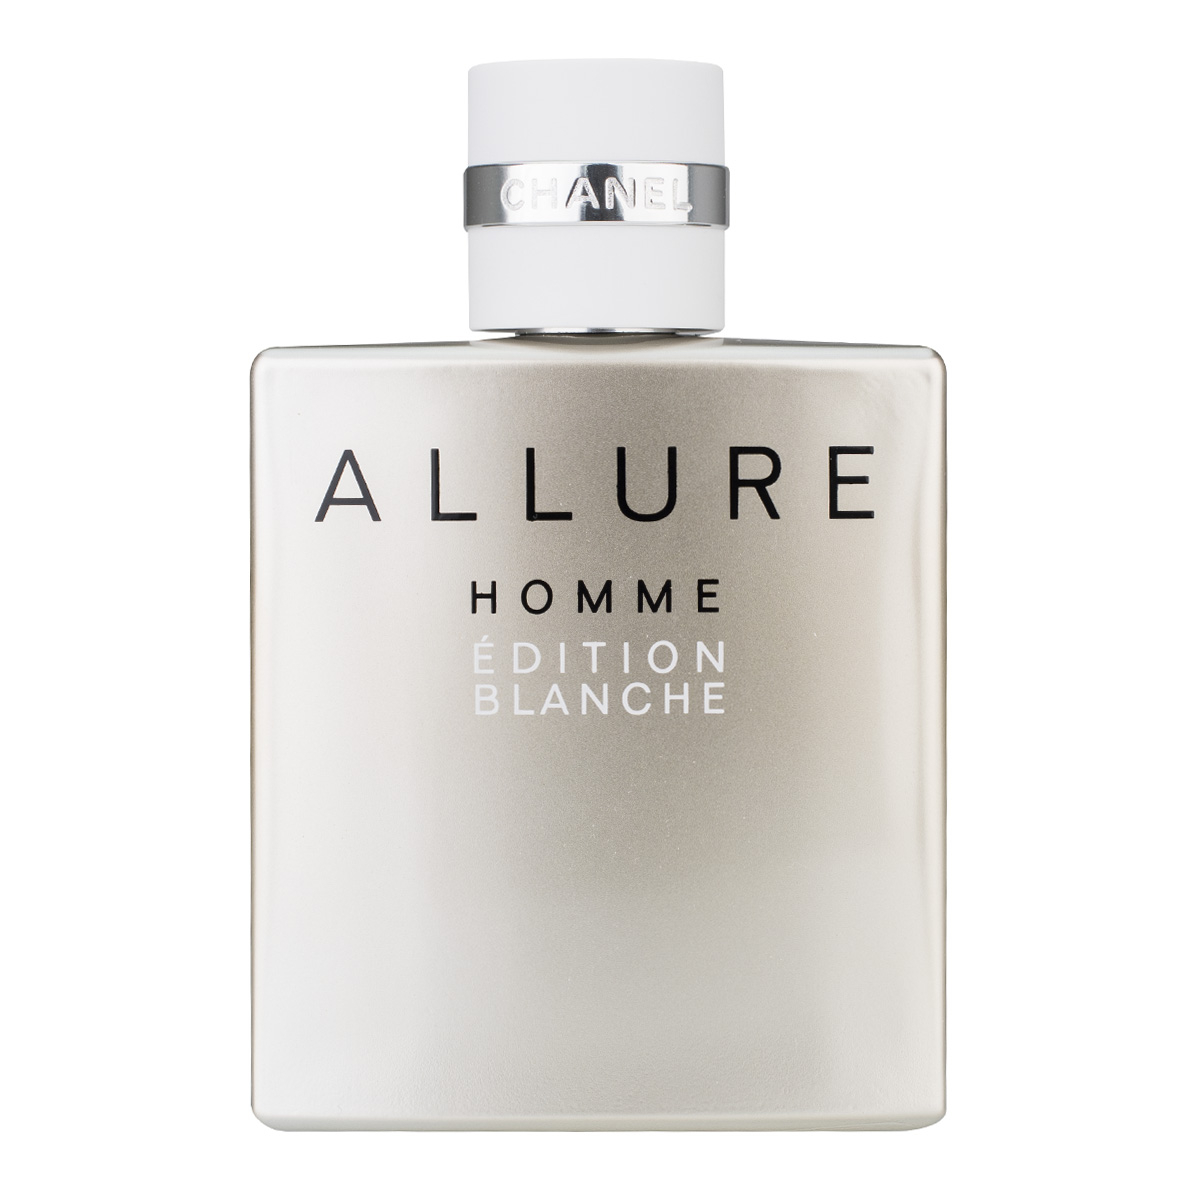 chanel homme